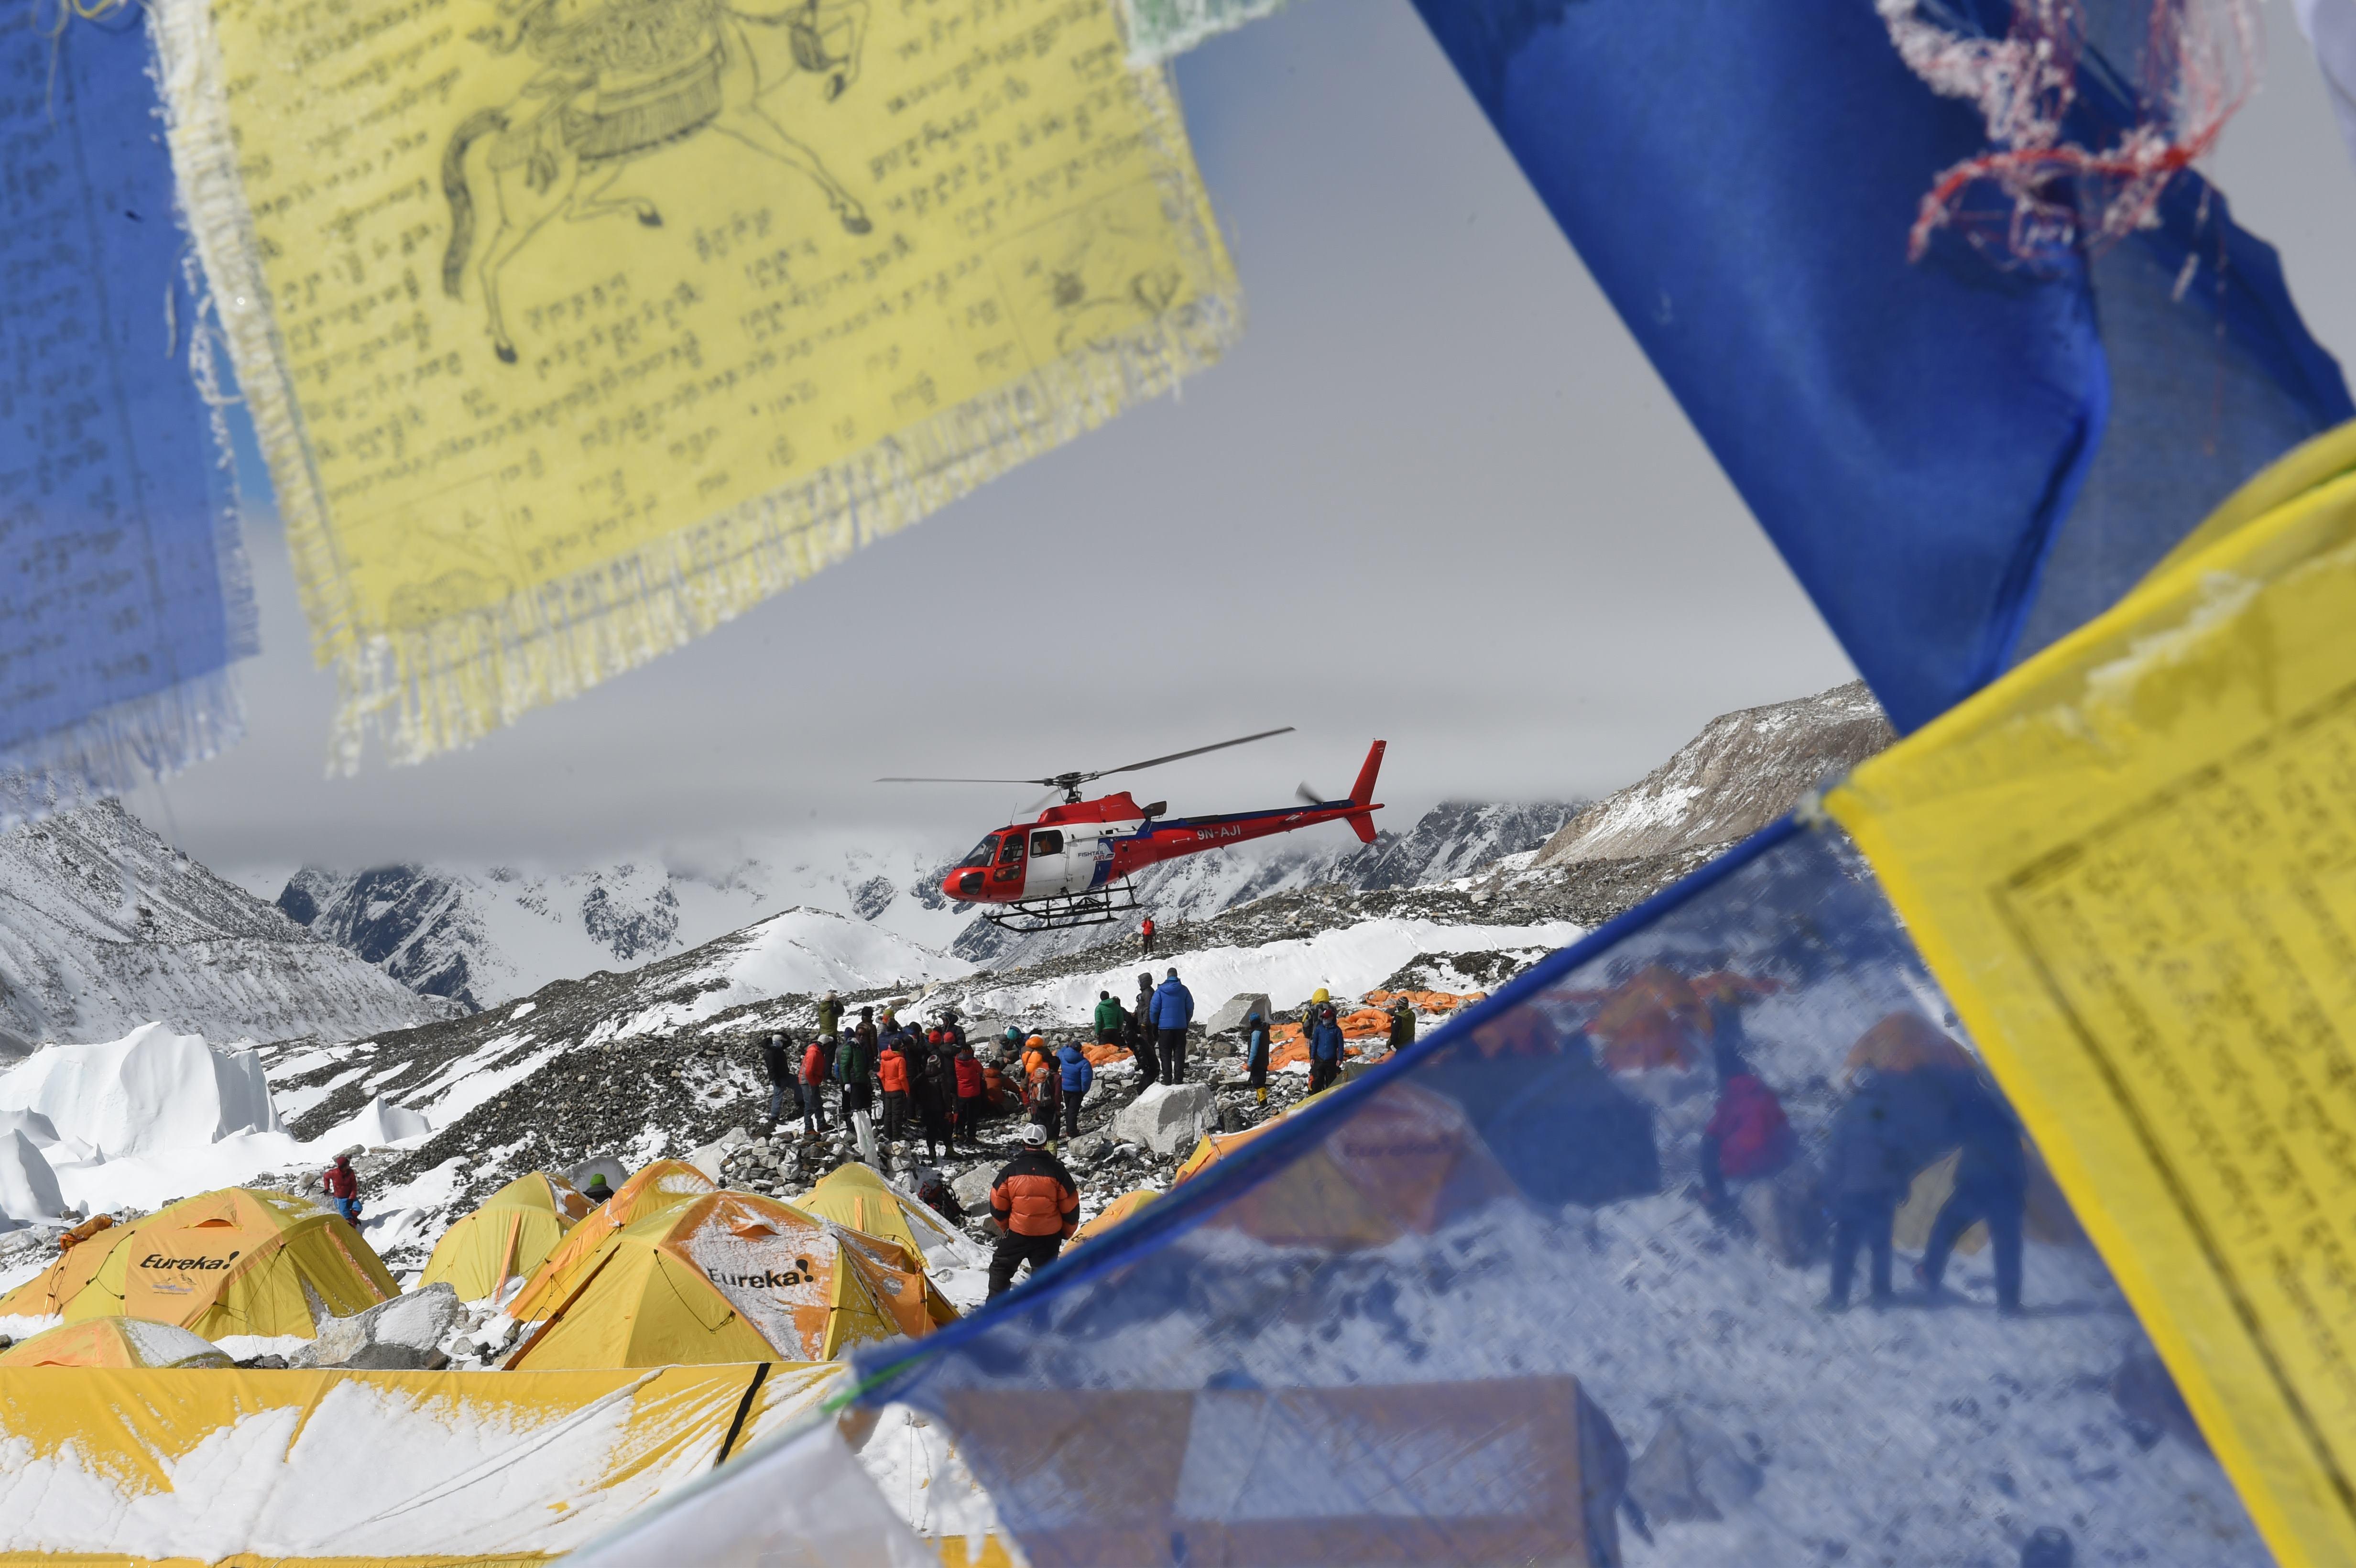 TOPSHOTS Prayer flags frame a rescue helicopter as it ferries the injured from Everest Base Camp on April 26, 2015, a day after an avalanche triggered by an earthquake devastated the camp. Rescuers in Nepal are searching frantically for survivors of a huge quake on April 25, that killed nearly 2,000, digging through rubble in the devastated capital Kathmandu and airlifting victims of an avalanche at Everest base camp. AFP PHOTO/ROBERTO SCHMIDT